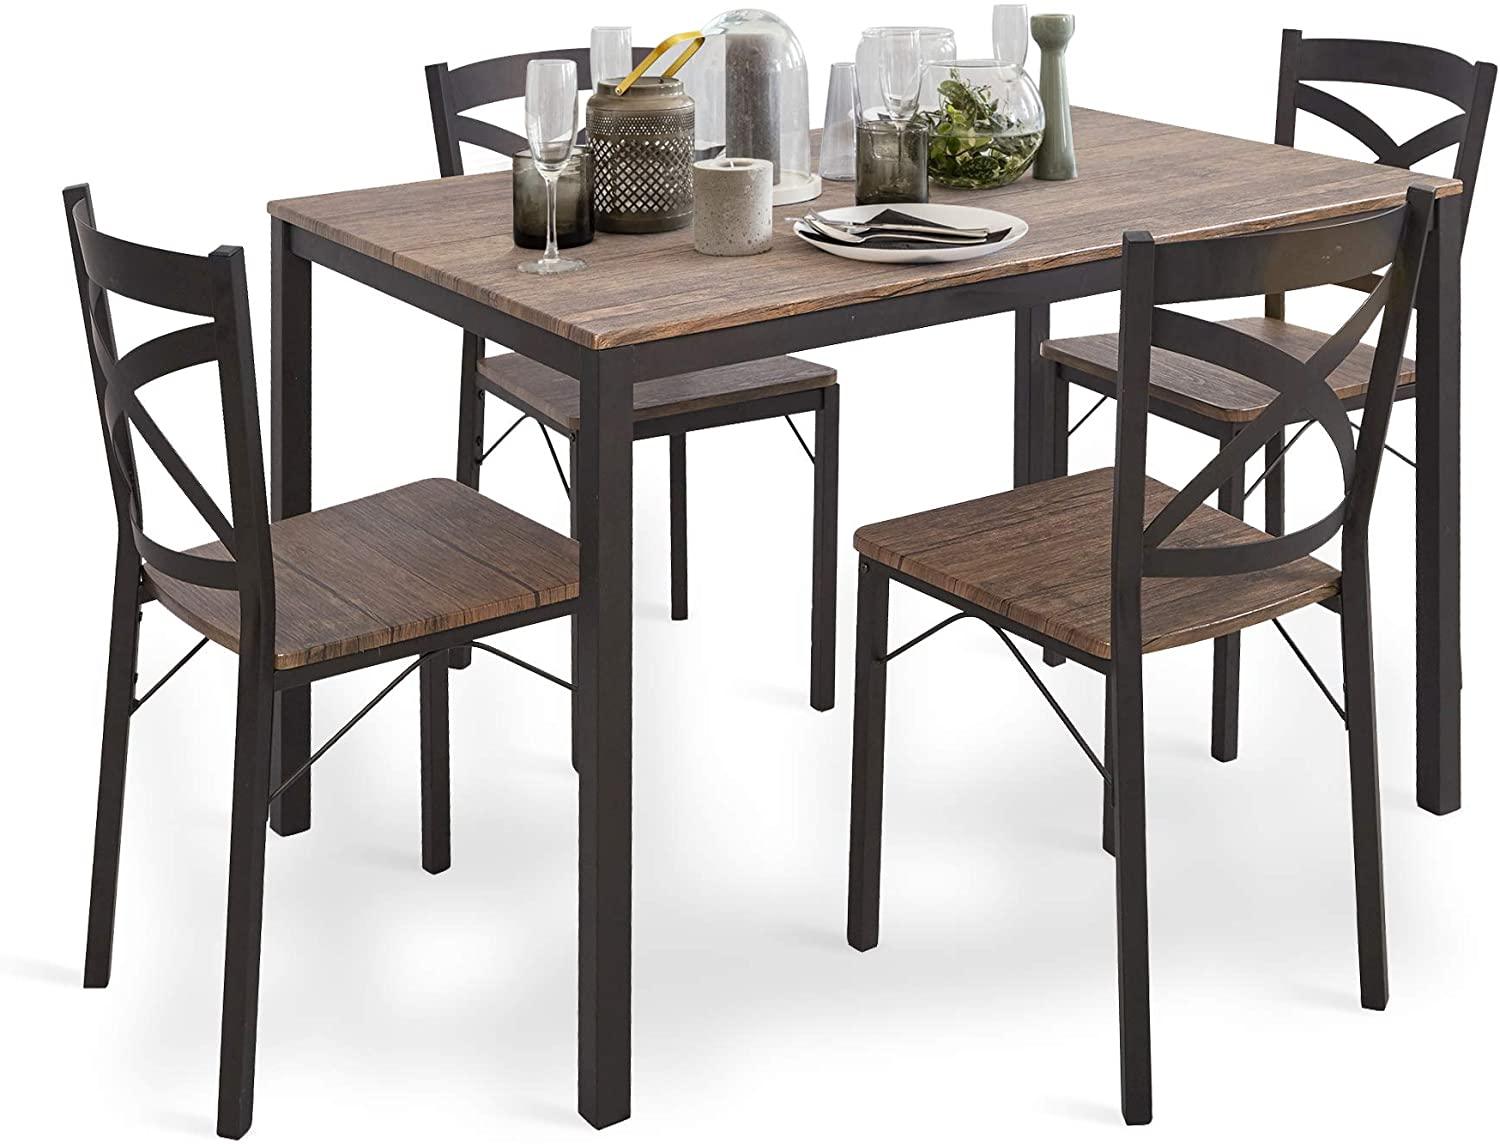 5 PC Wood Dining Set Table And Chairs 4 With Metal Legs, Home Kitchen Breakfast Furniture - Bosonshop